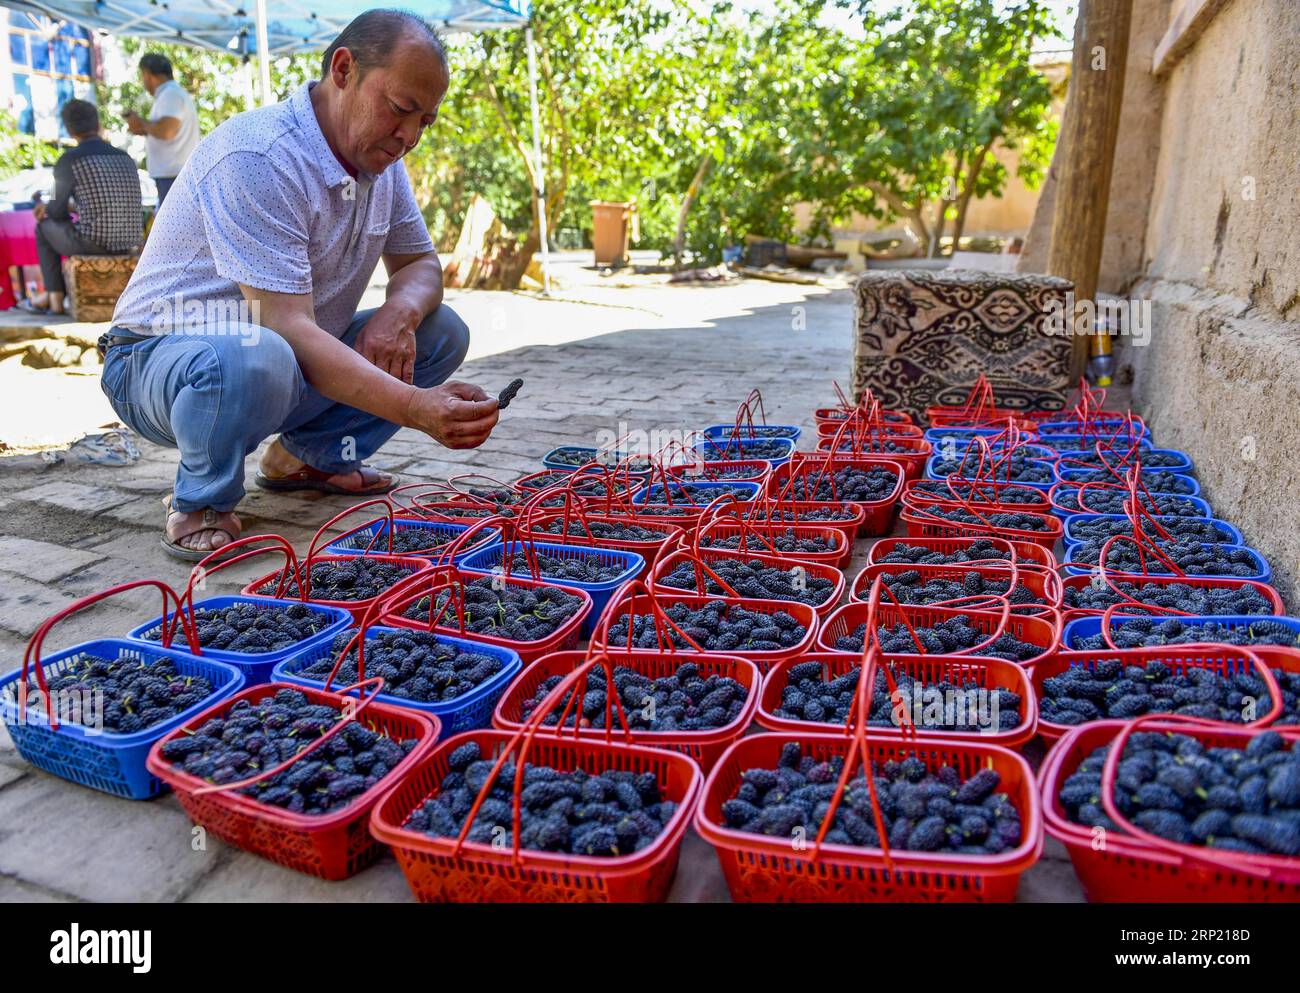 (180810) -- URUMQI, Aug. 10, 2018 -- A vendor checks harvested mulberries in Turpan, northwest China s Xinjiang Uygur Autonomous Region, May 11, 2017. Xinjiang, enjoying the long sunshine duration and large temperature difference, is famous for its bounty of fruits, including grapes, melons, pears, etc.. ) (wyo) CHINA-XINJIANG-FRUITS (CN) HuxHuhu PUBLICATIONxNOTxINxCHN Stock Photo